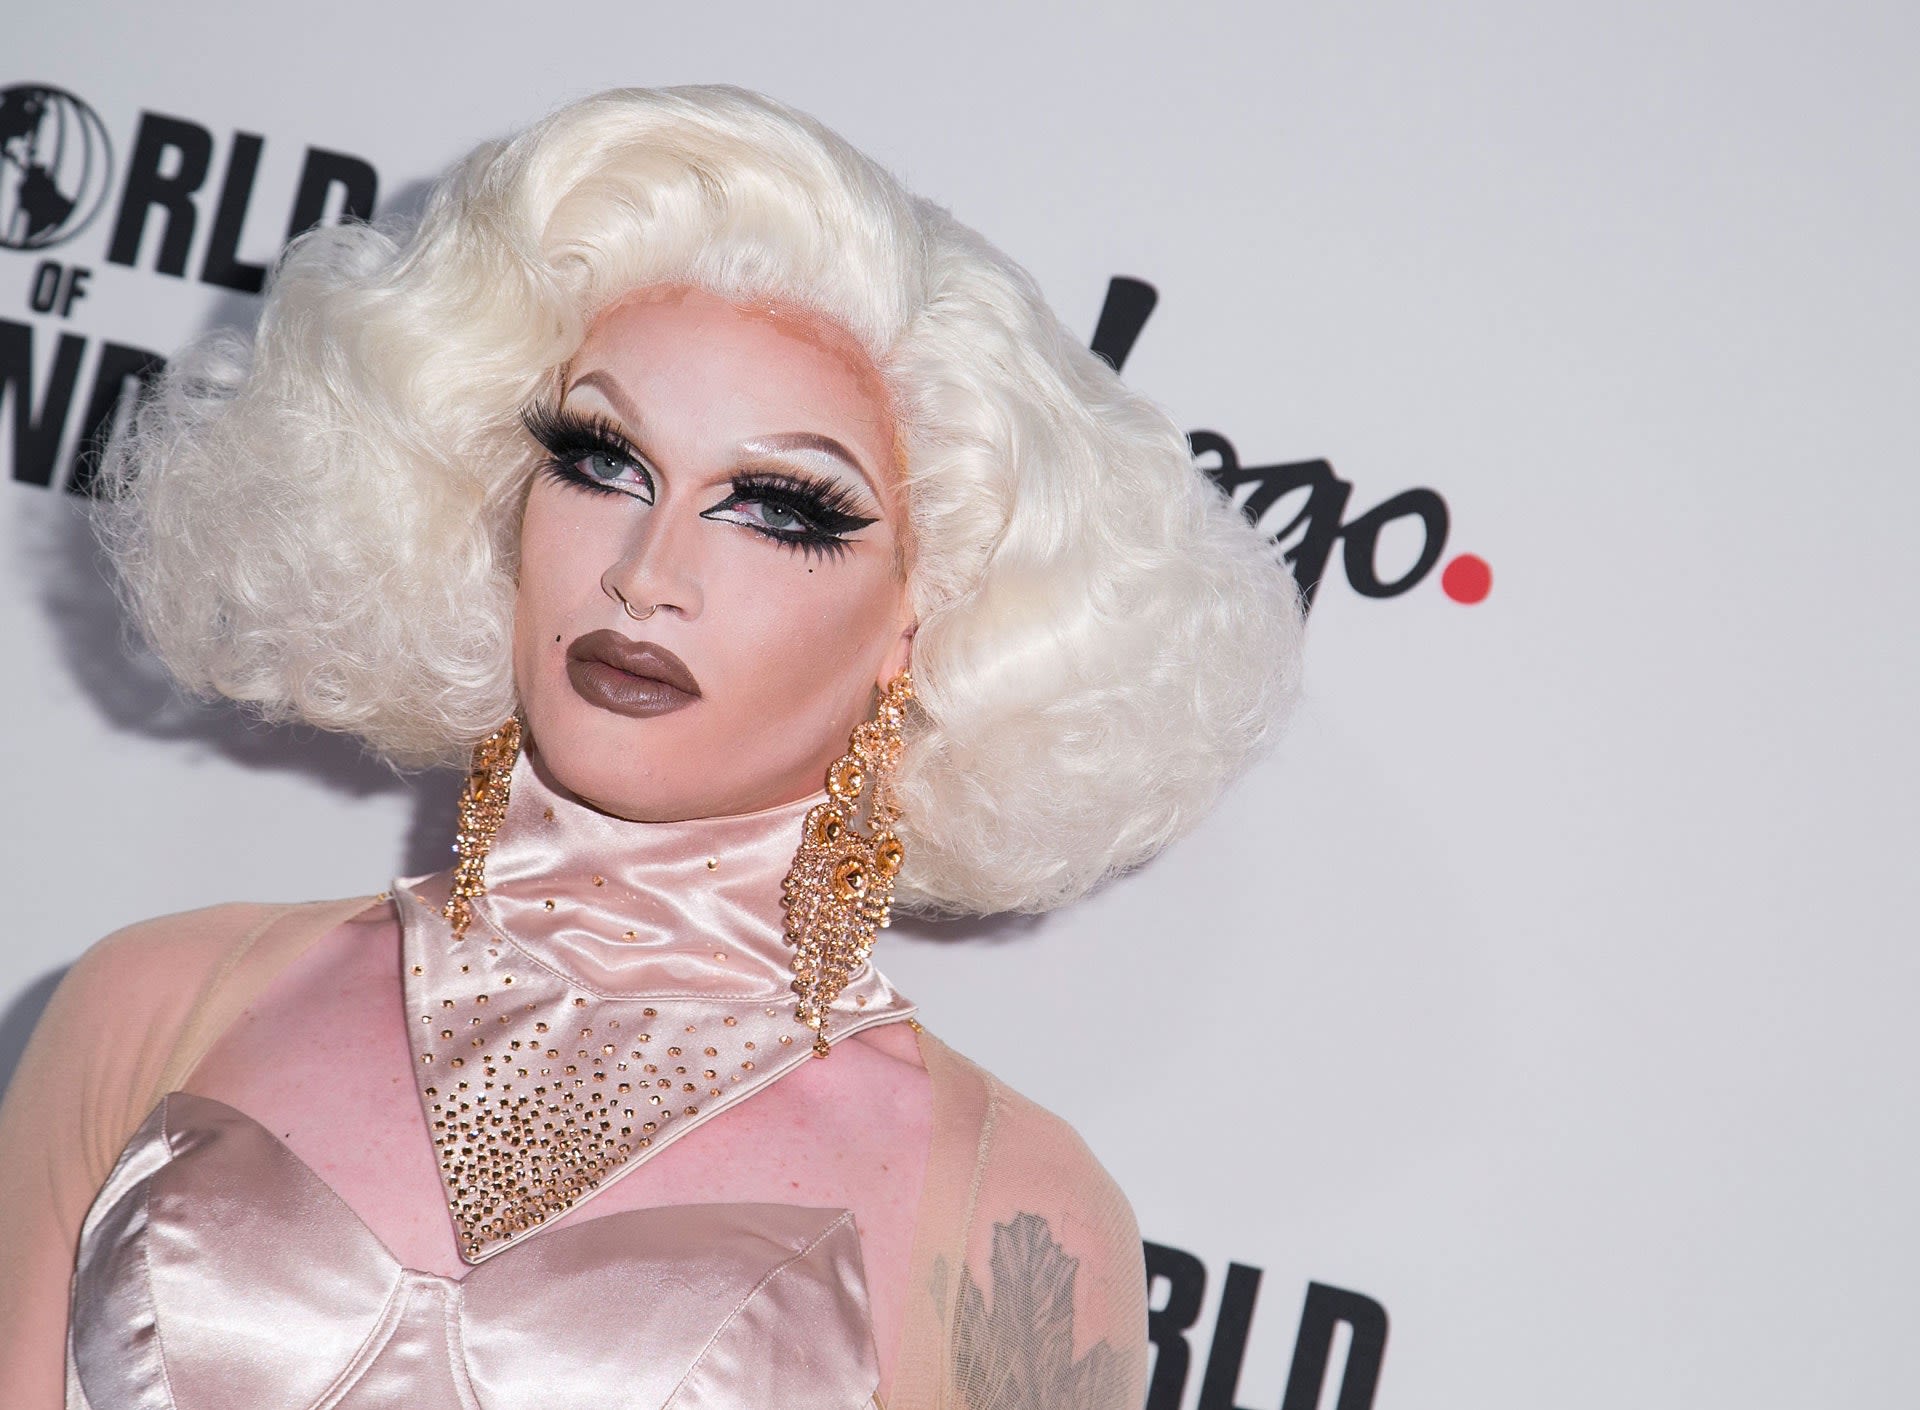 Former Drag Race Star Pearl Speaks Out About “Scary” Fan Behavior